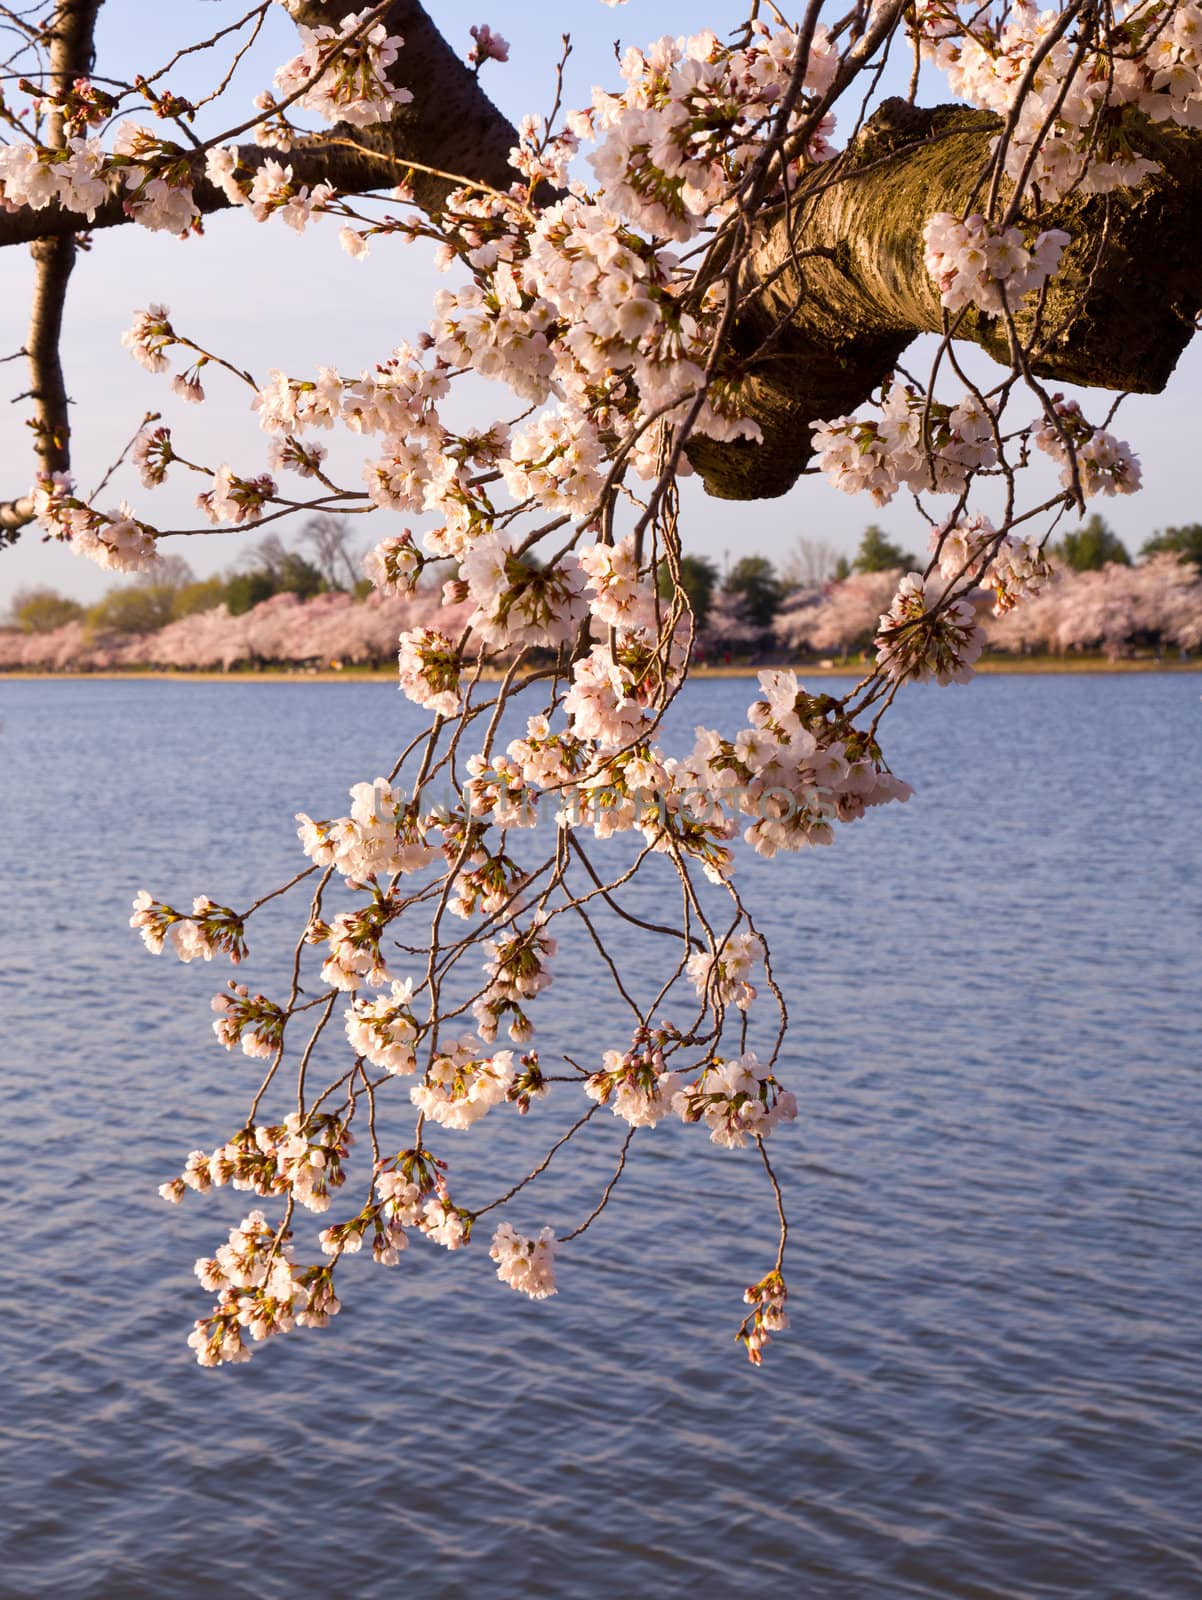 Cherry Blossom Trees by Tidal Basin by steheap